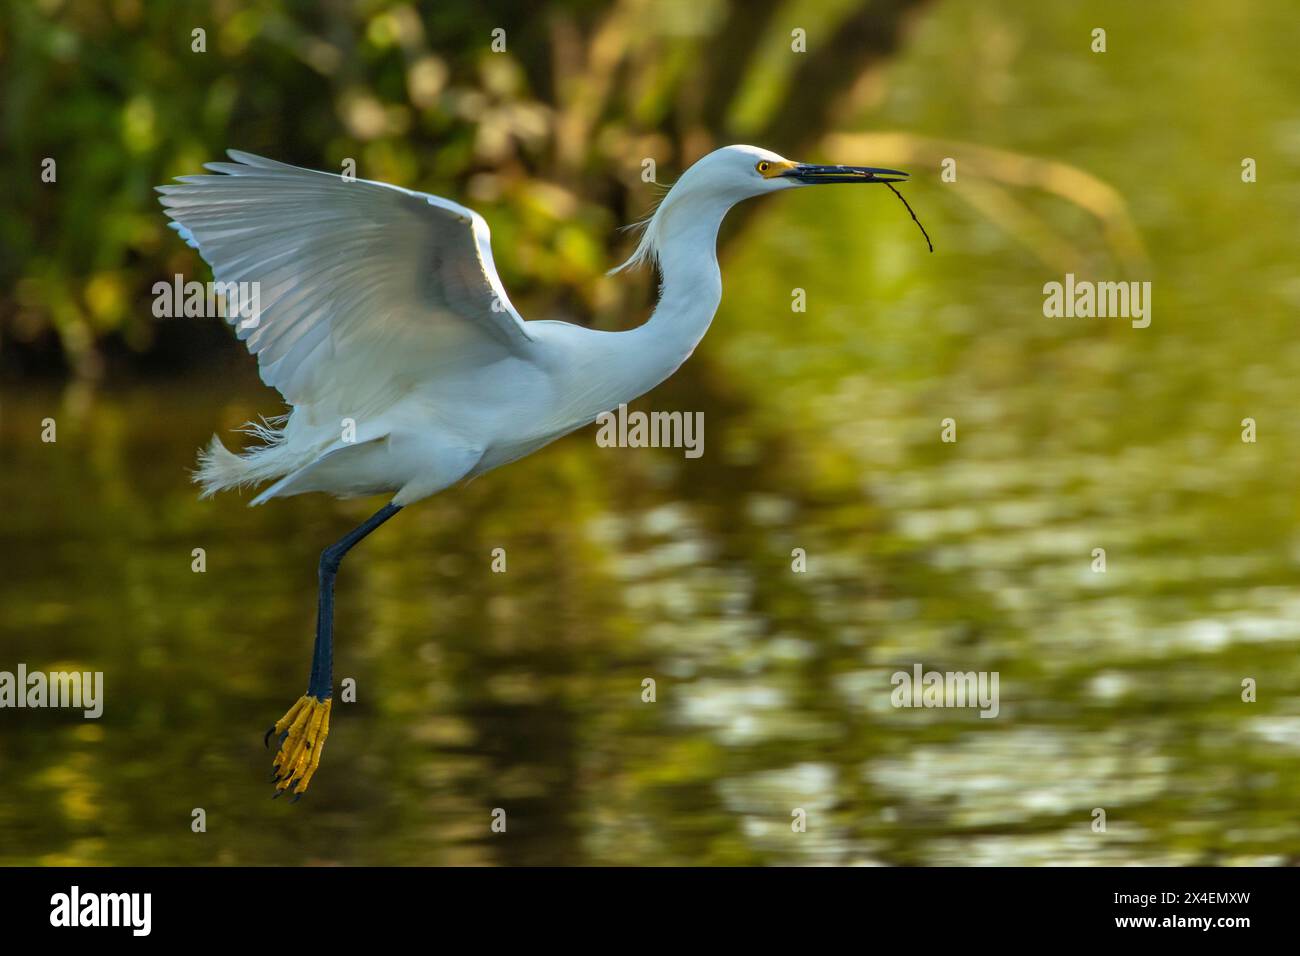 USA, Florida, Jefferson Island. Snowy egret flying with nesting material. Stock Photo